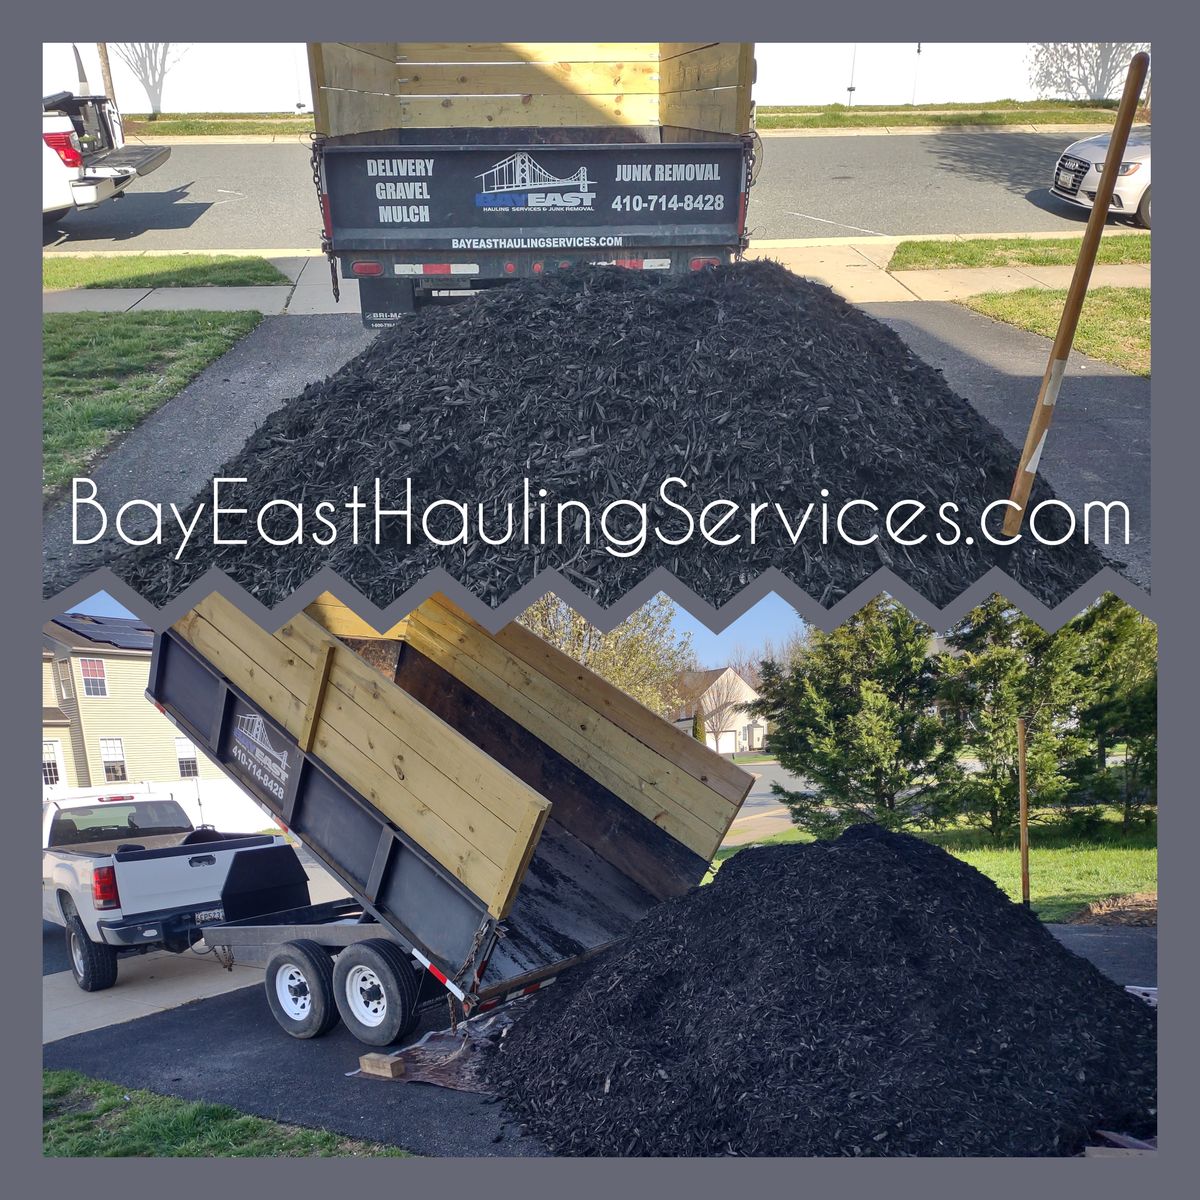 Aggregate Deliveries / Dump Trailer Services for Bay East Hauling Services & Junk Removal in Grasonville, MD